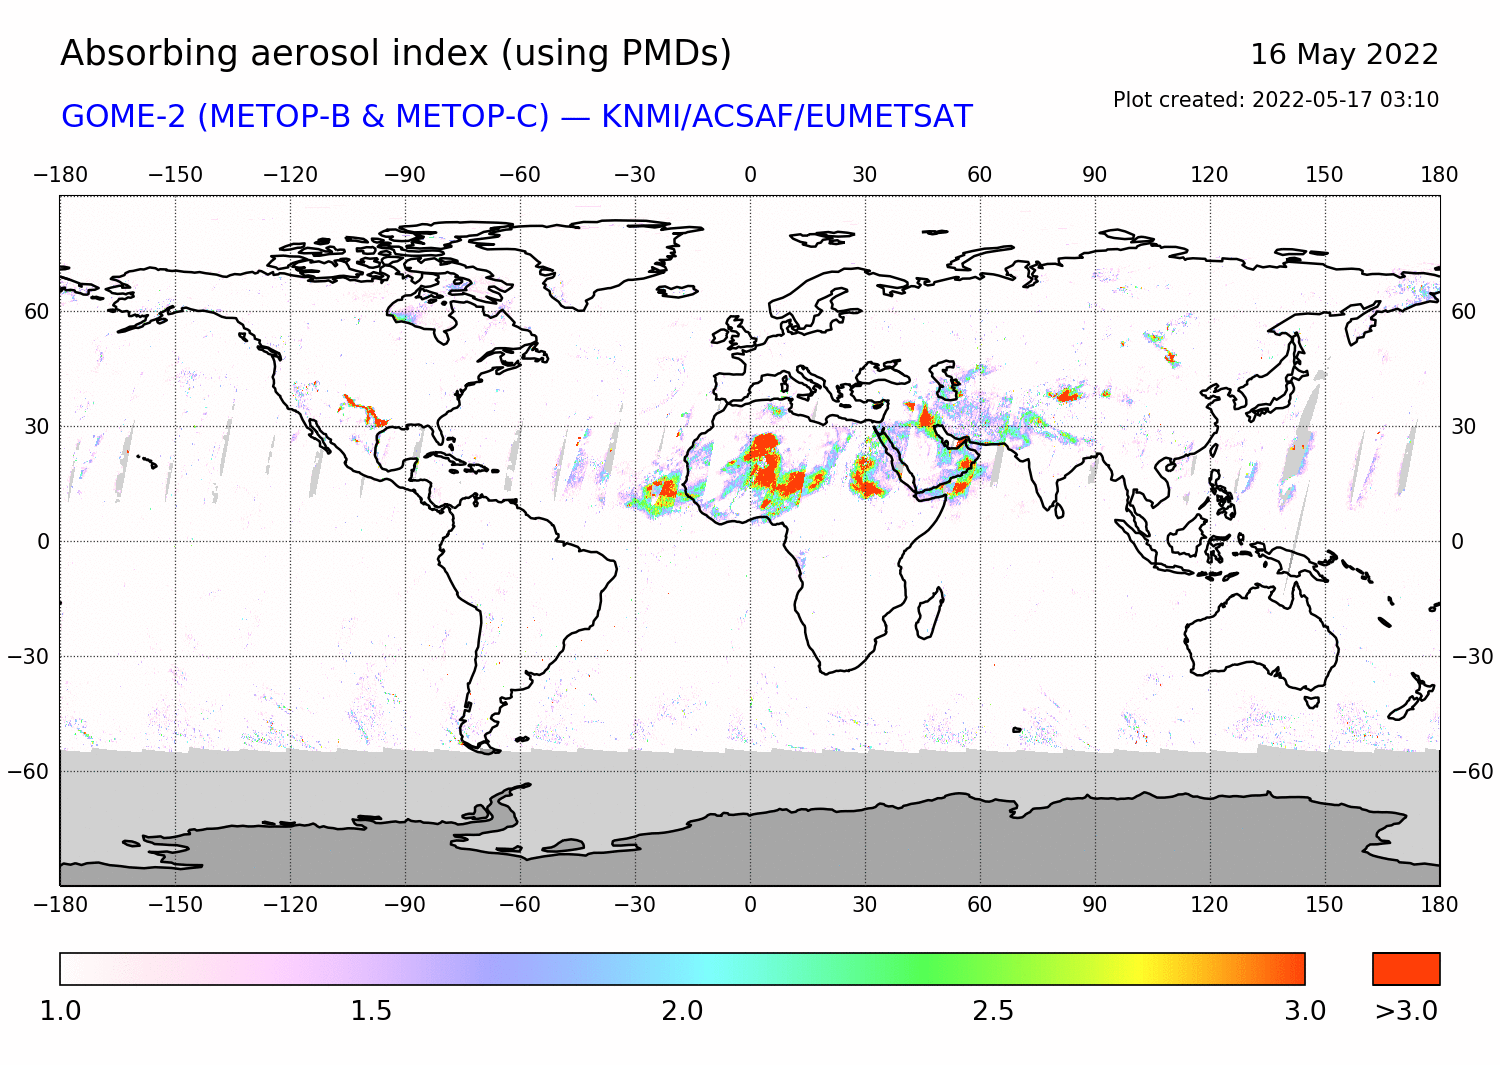 GOME-2 - Absorbing aerosol index of 16 May 2022